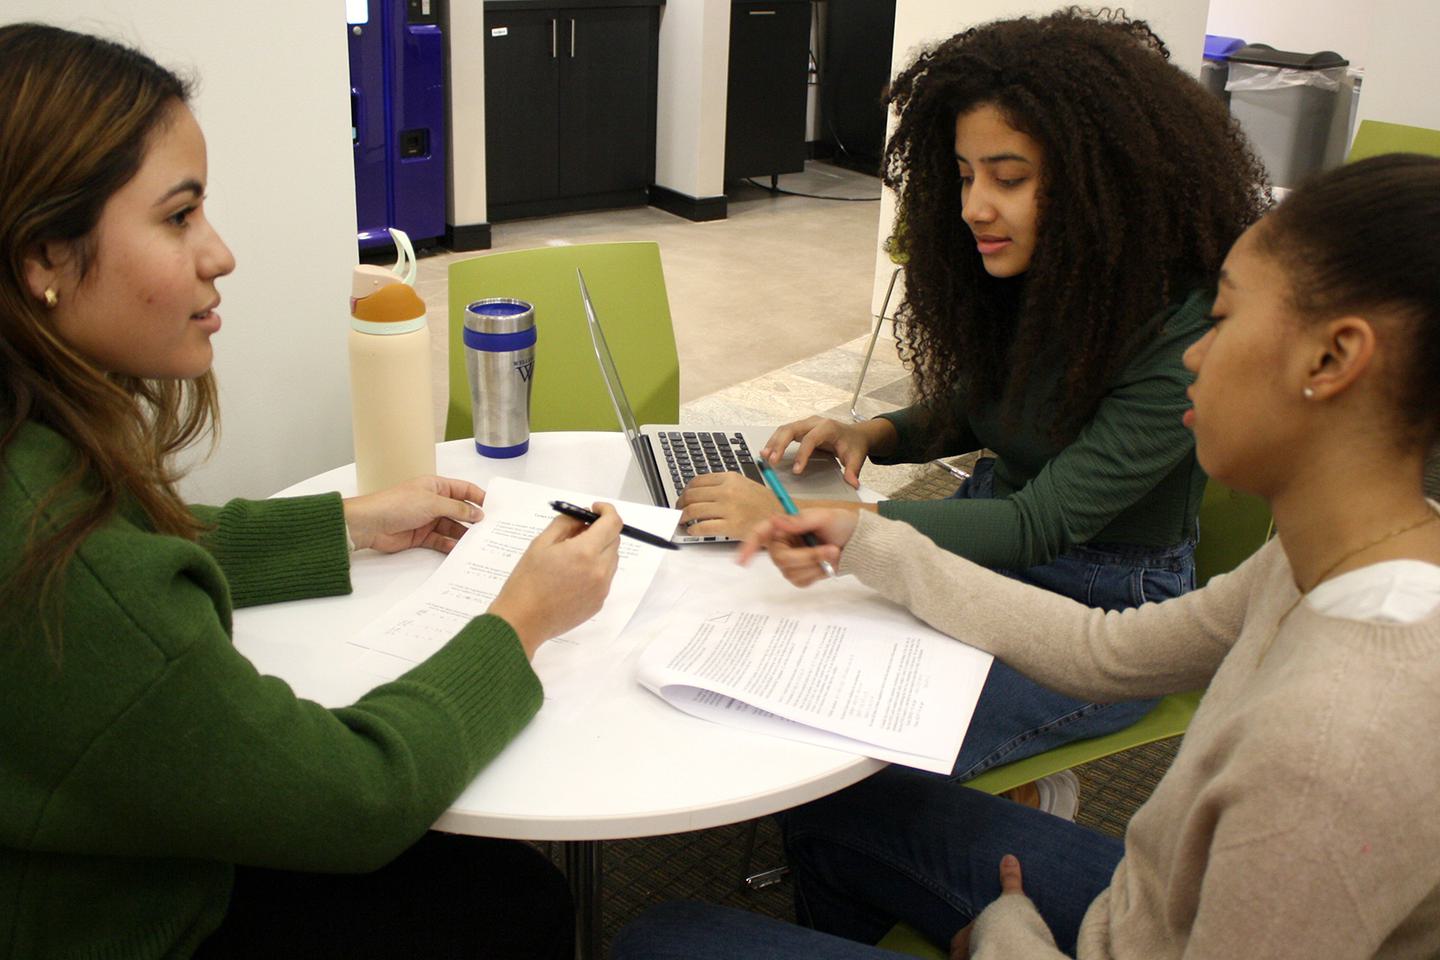 Three students sit at a table looking over papers.